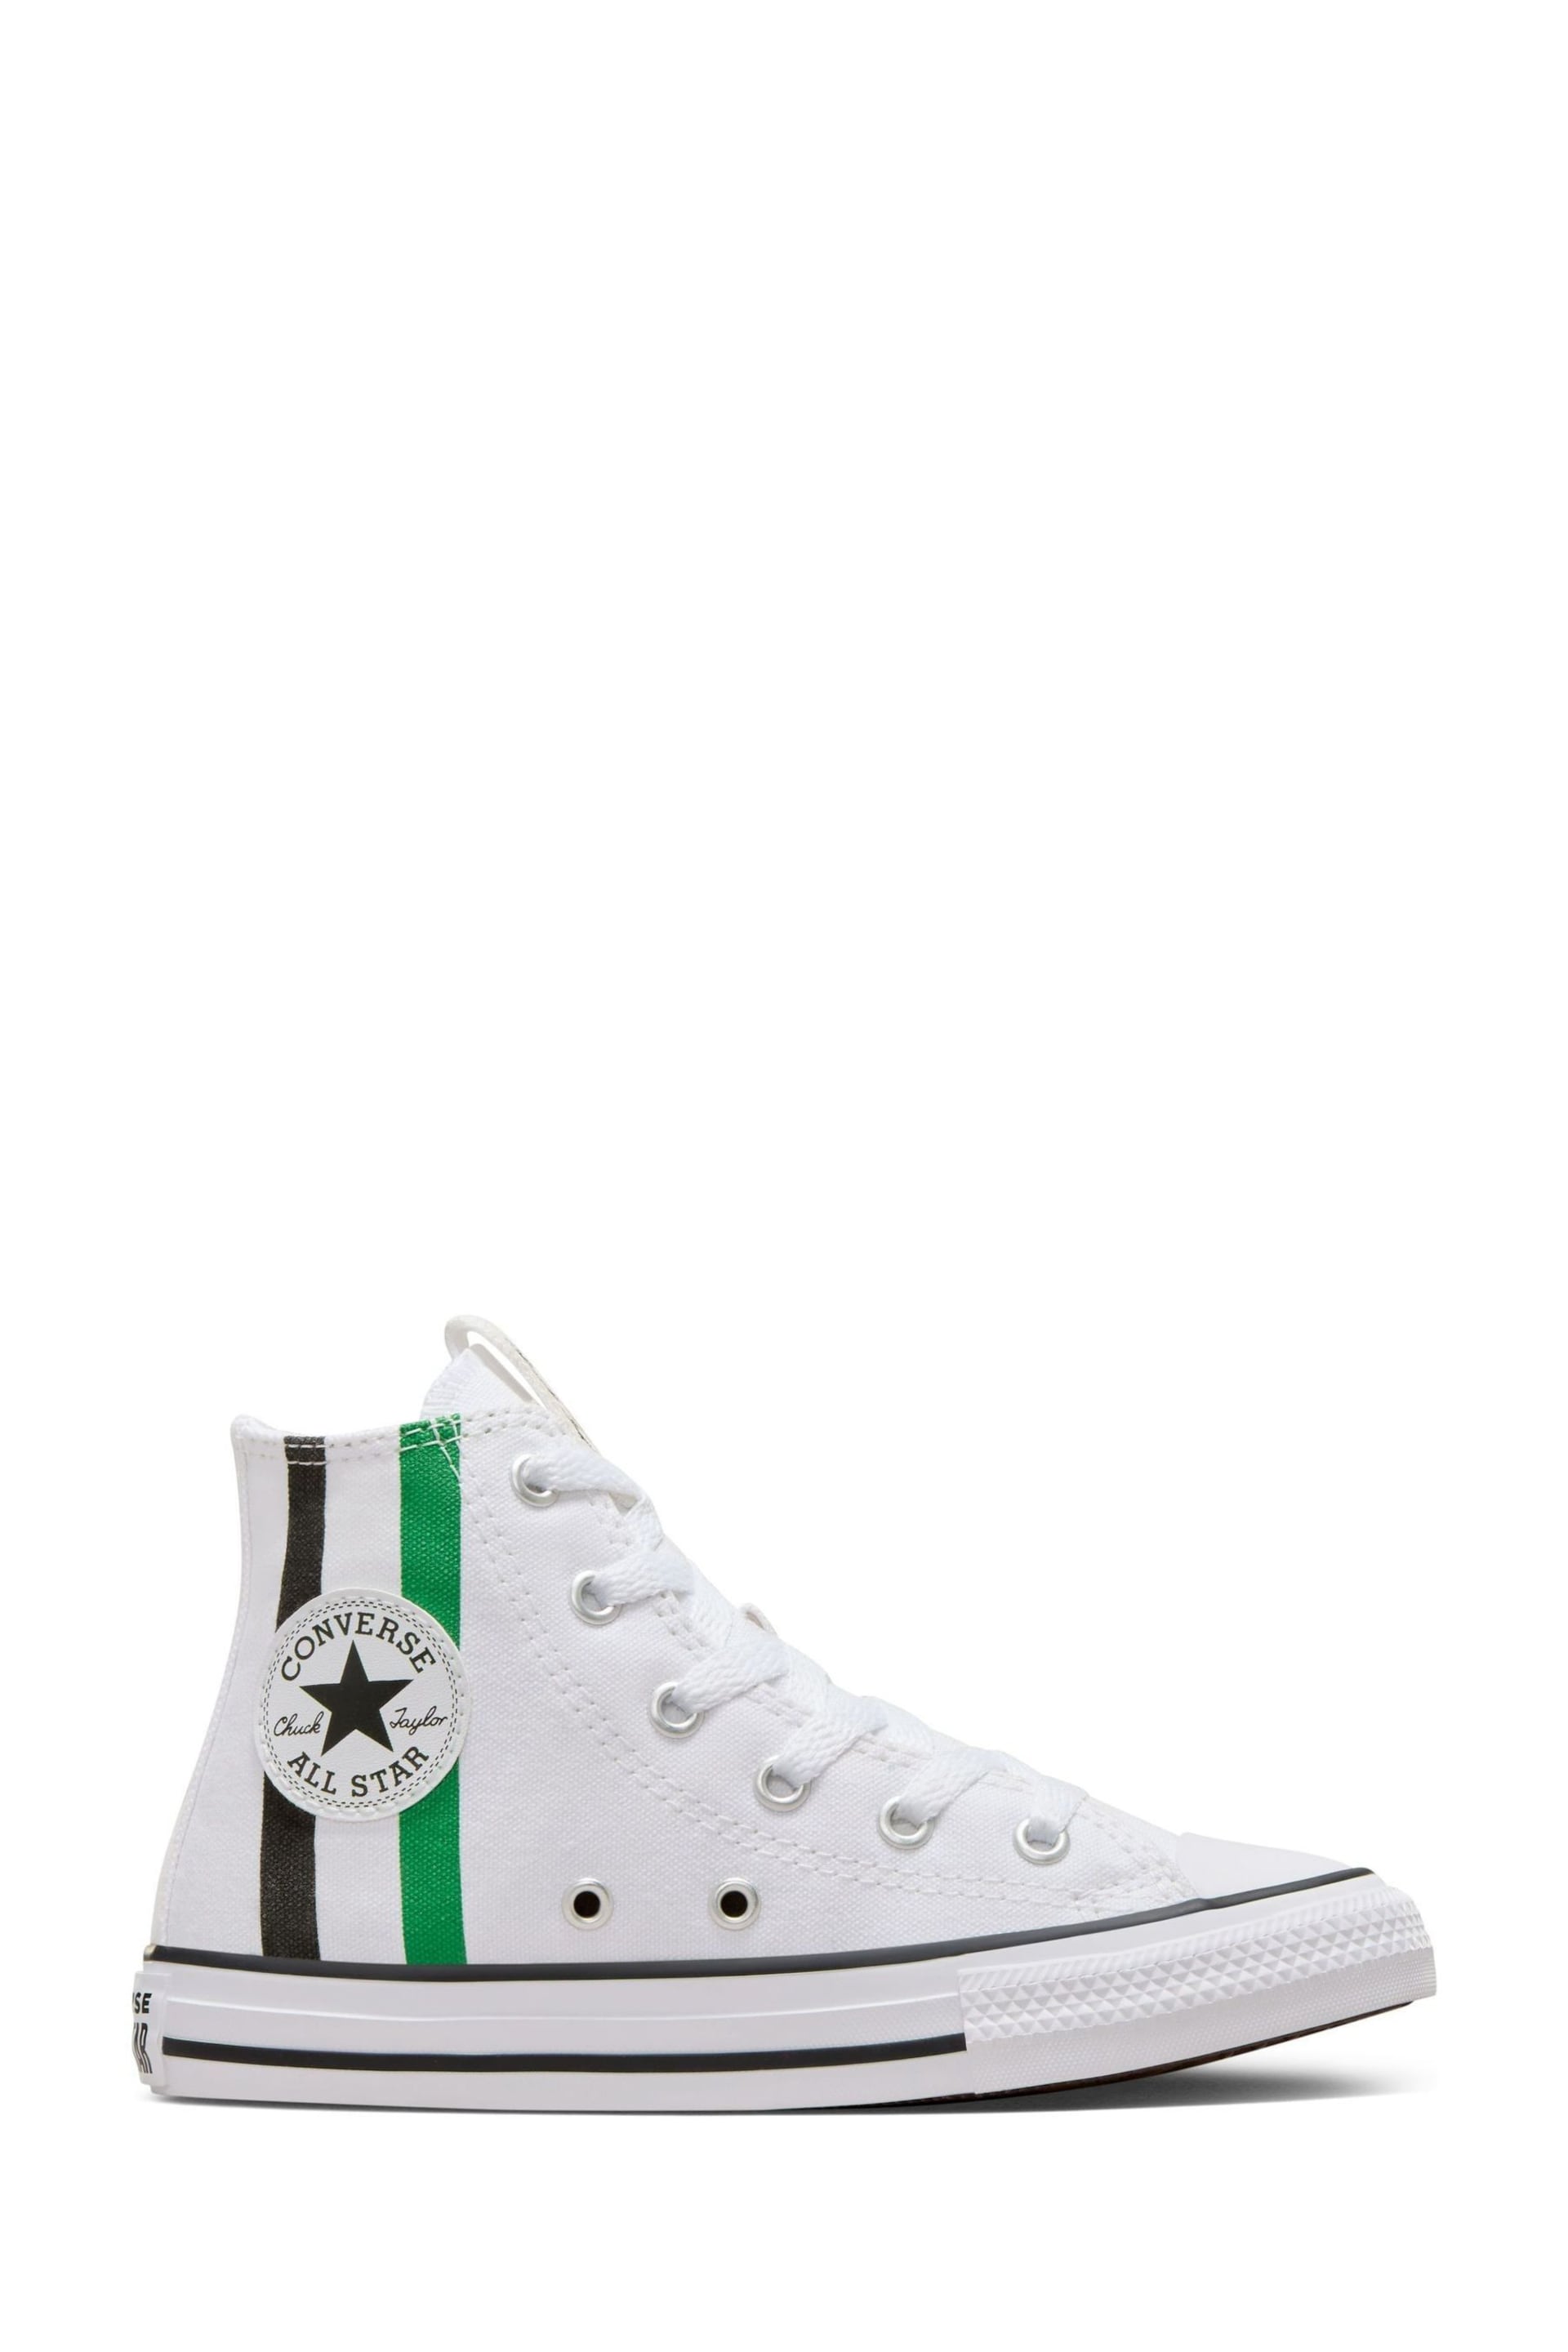 Converse Green Junior Chuck Taylor All Star Trainers - Image 1 of 11